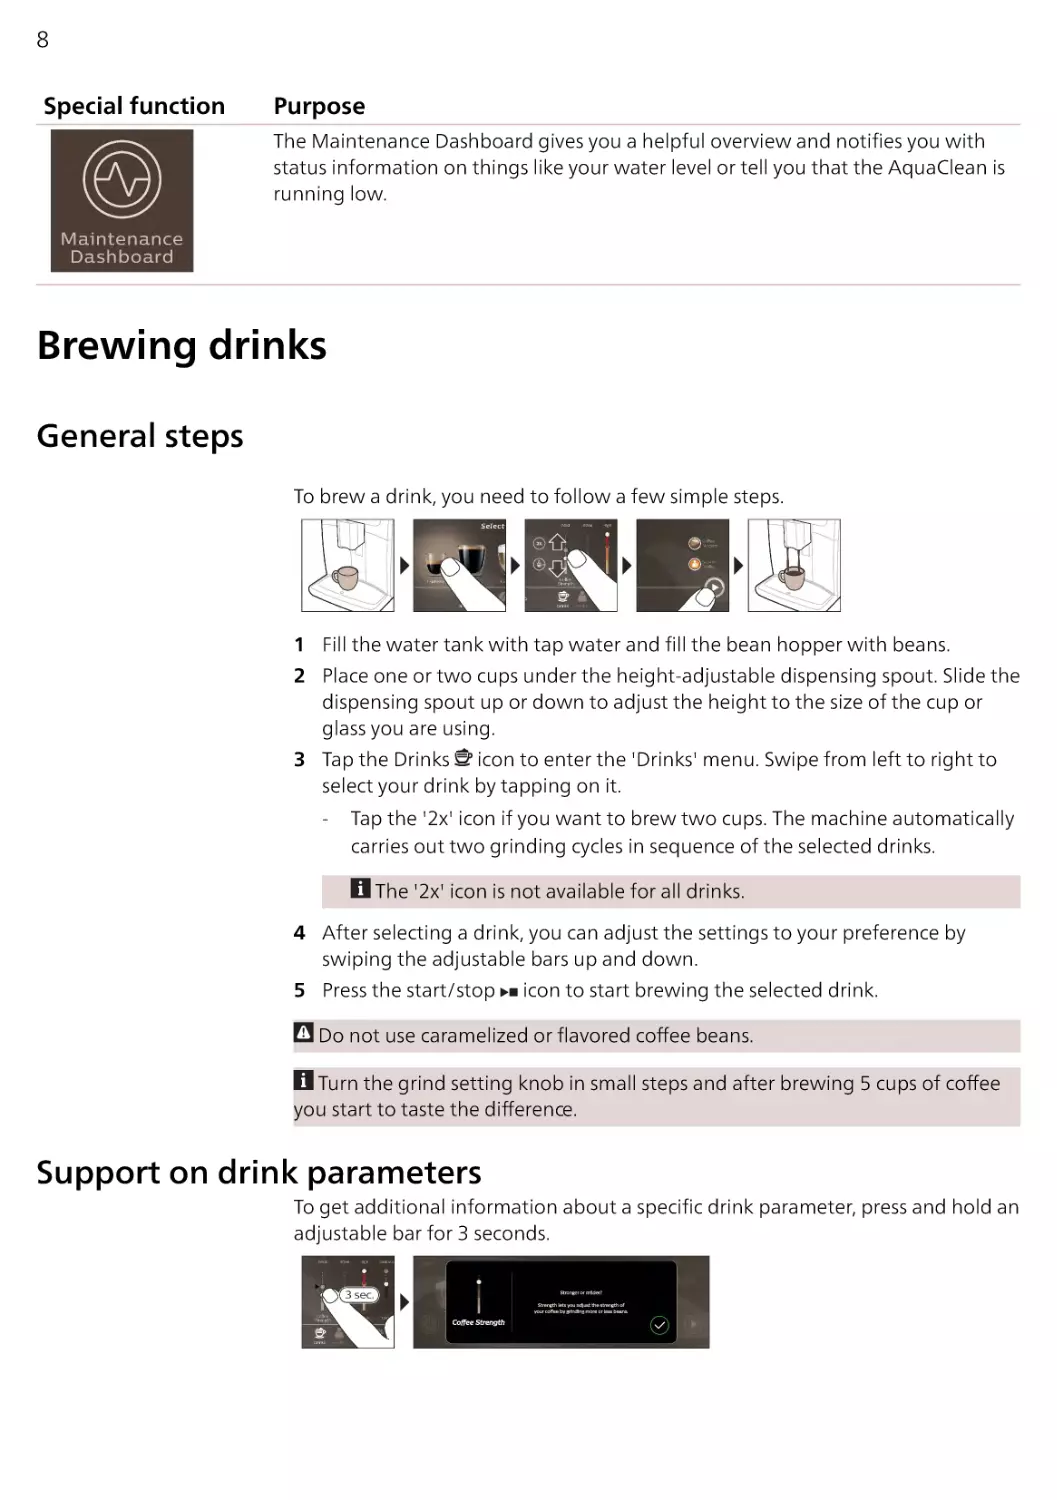 Brewing drinks
General steps
Support on drink parameters